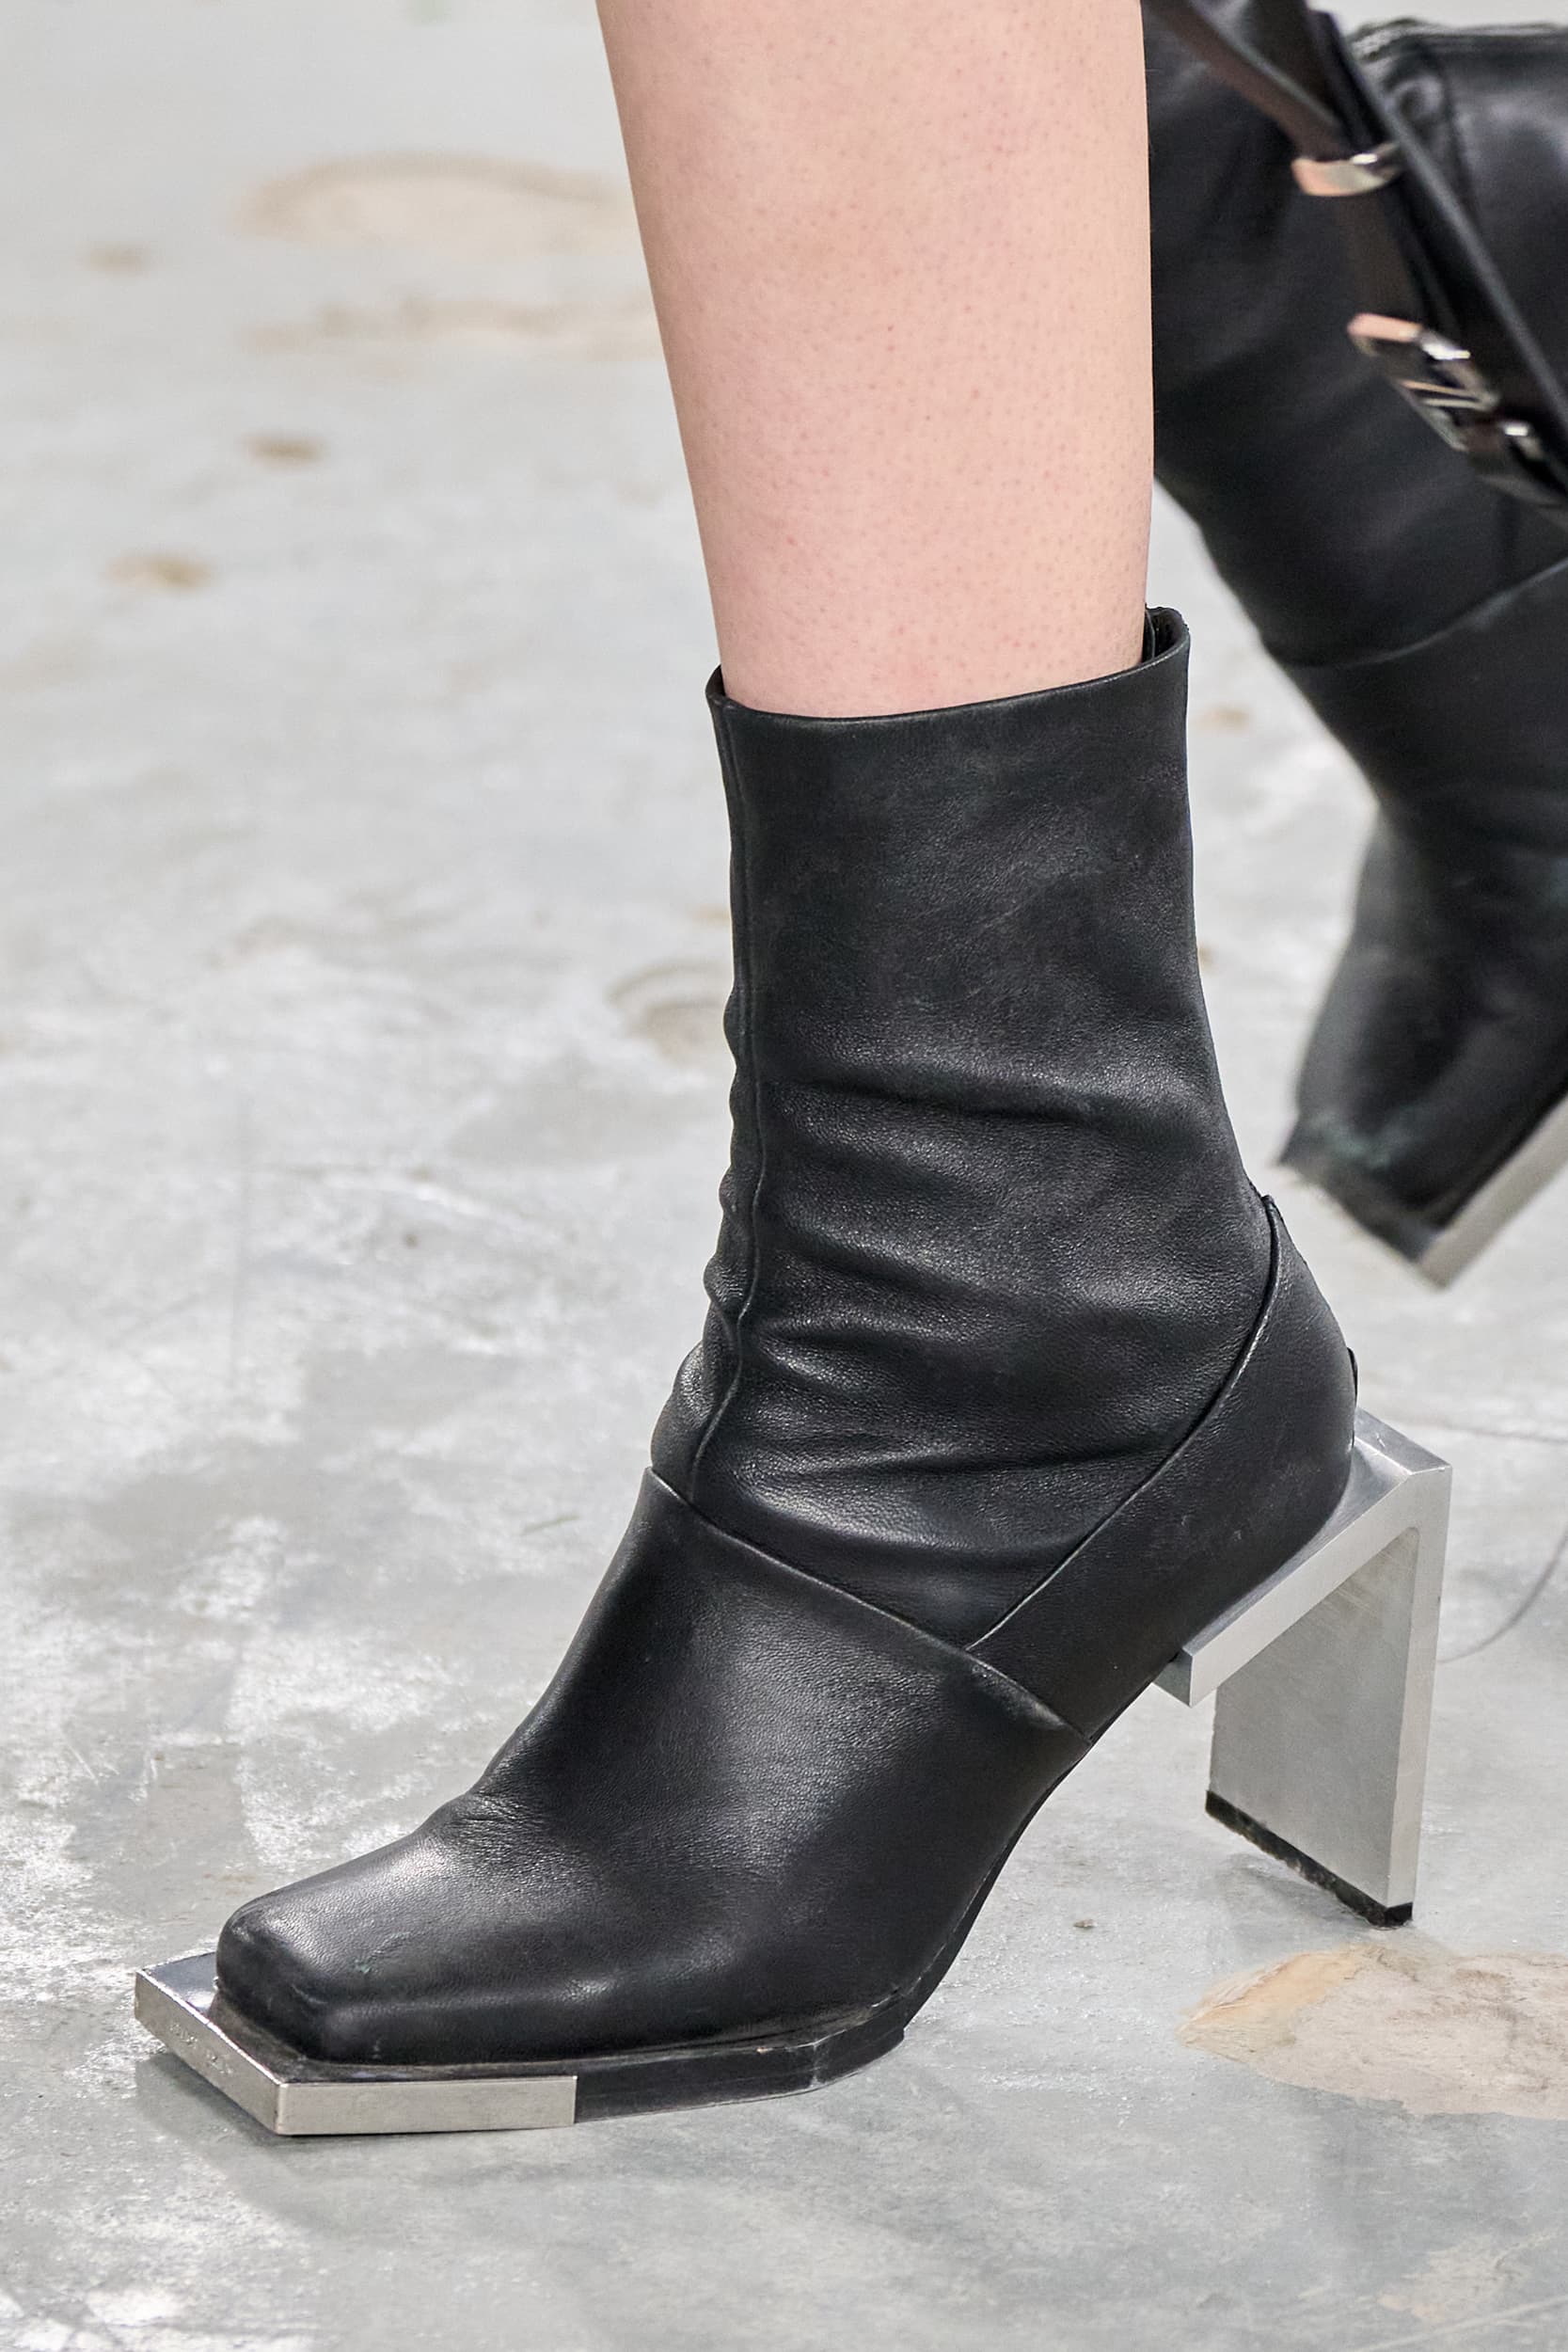 Boots Spring 2023 Fashion Trend | The Impression